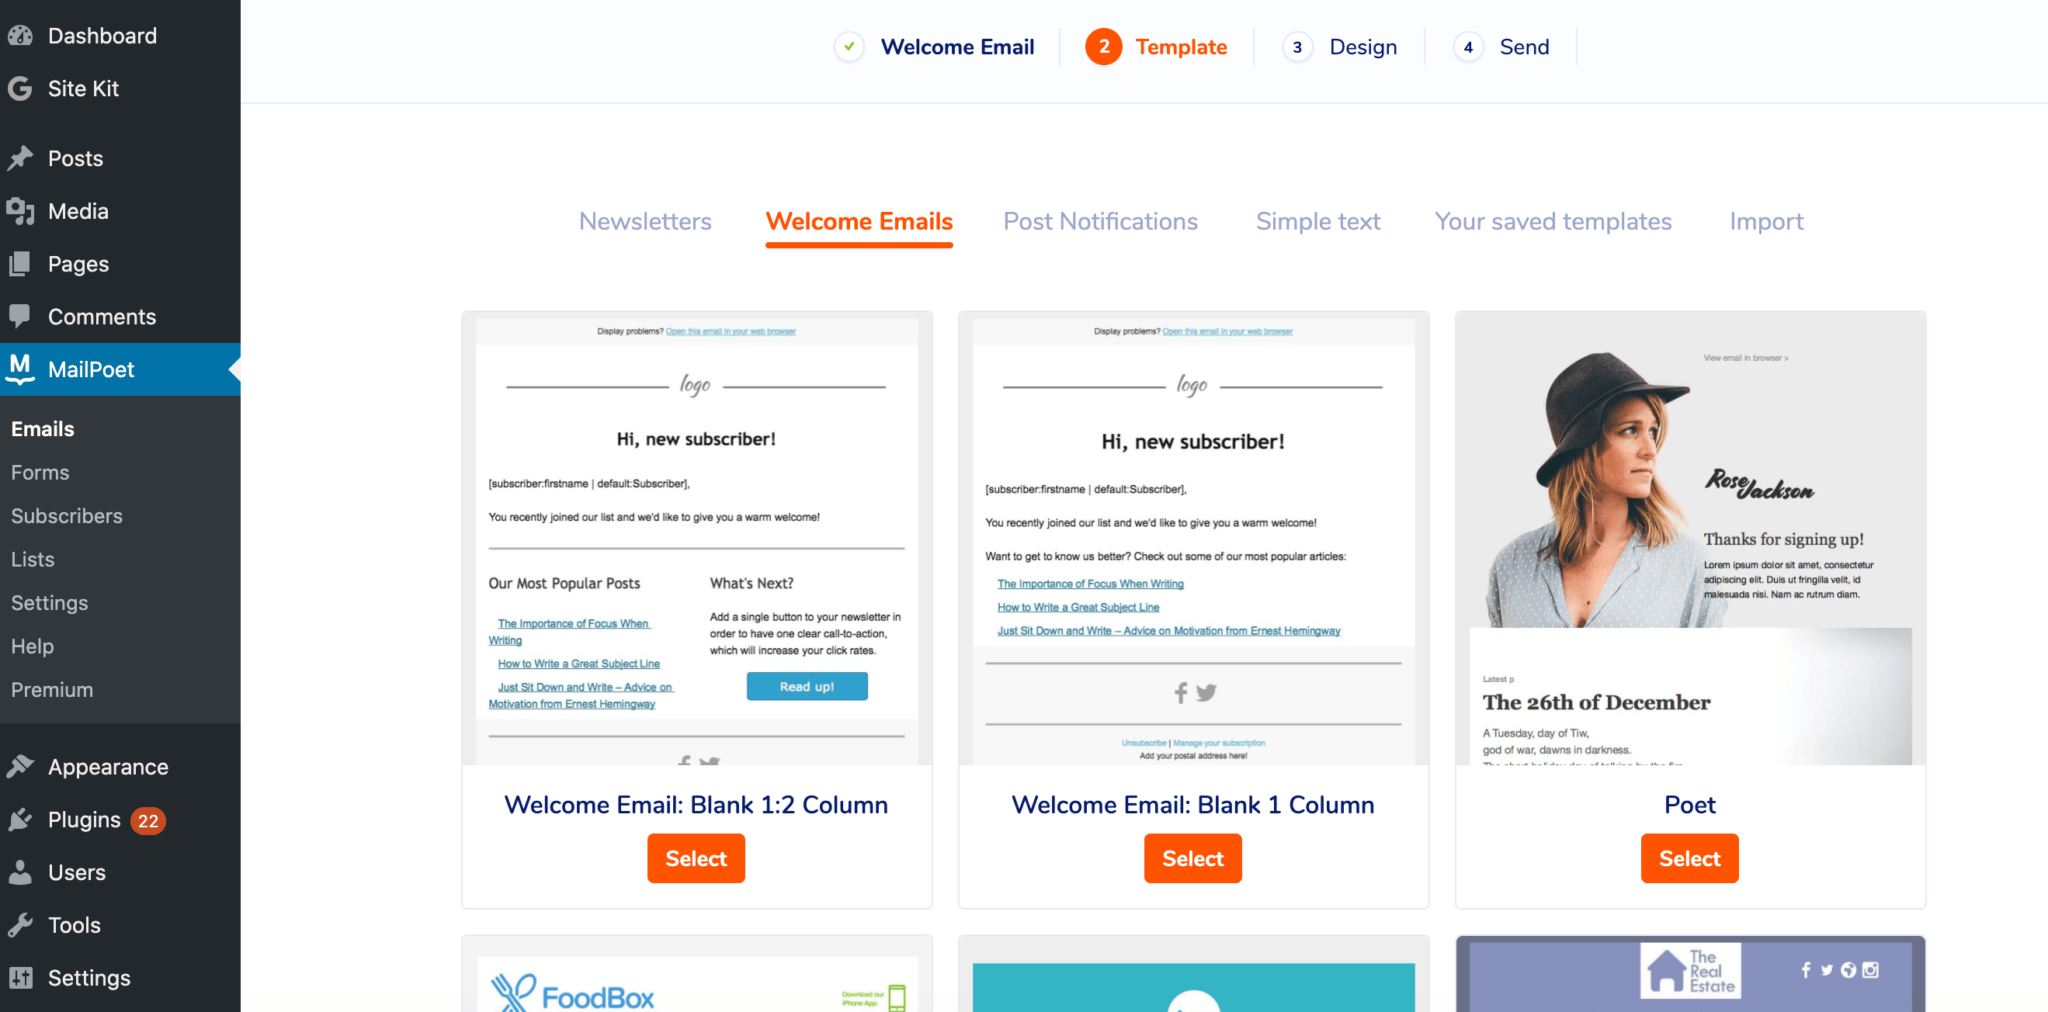 Welcome email templates in the MailPoet dashboard. 